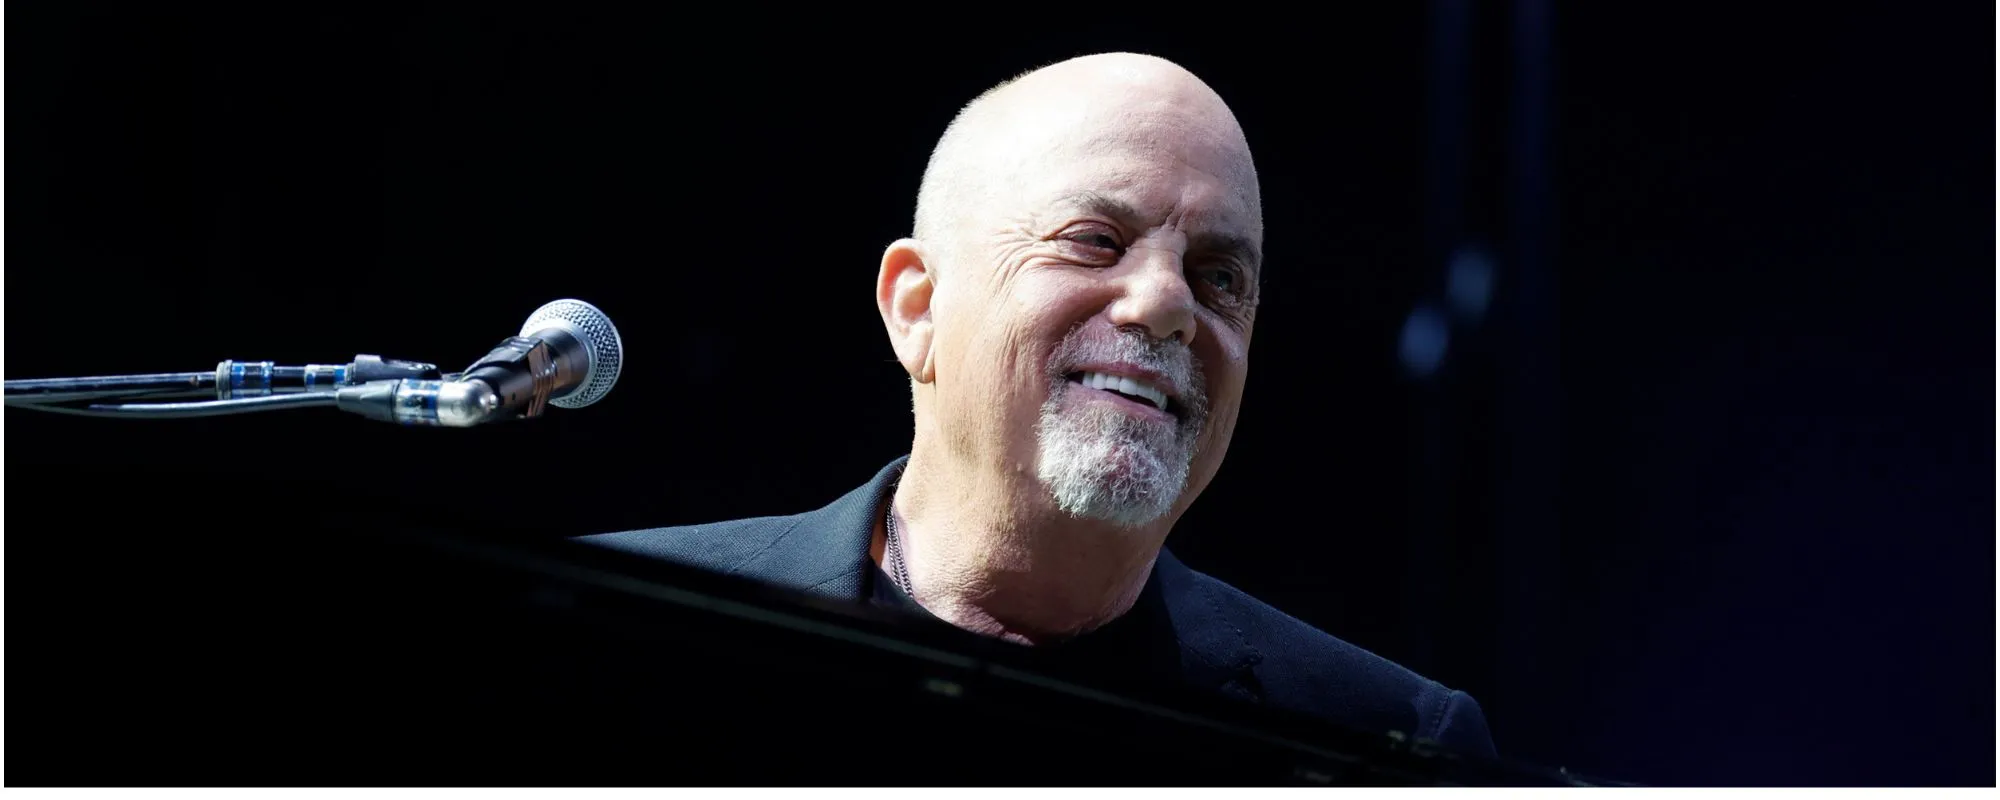 New Billy Joel Exhibit to Open on Long Island Next Month; Joel Schedules Another Madison Square Garden Show